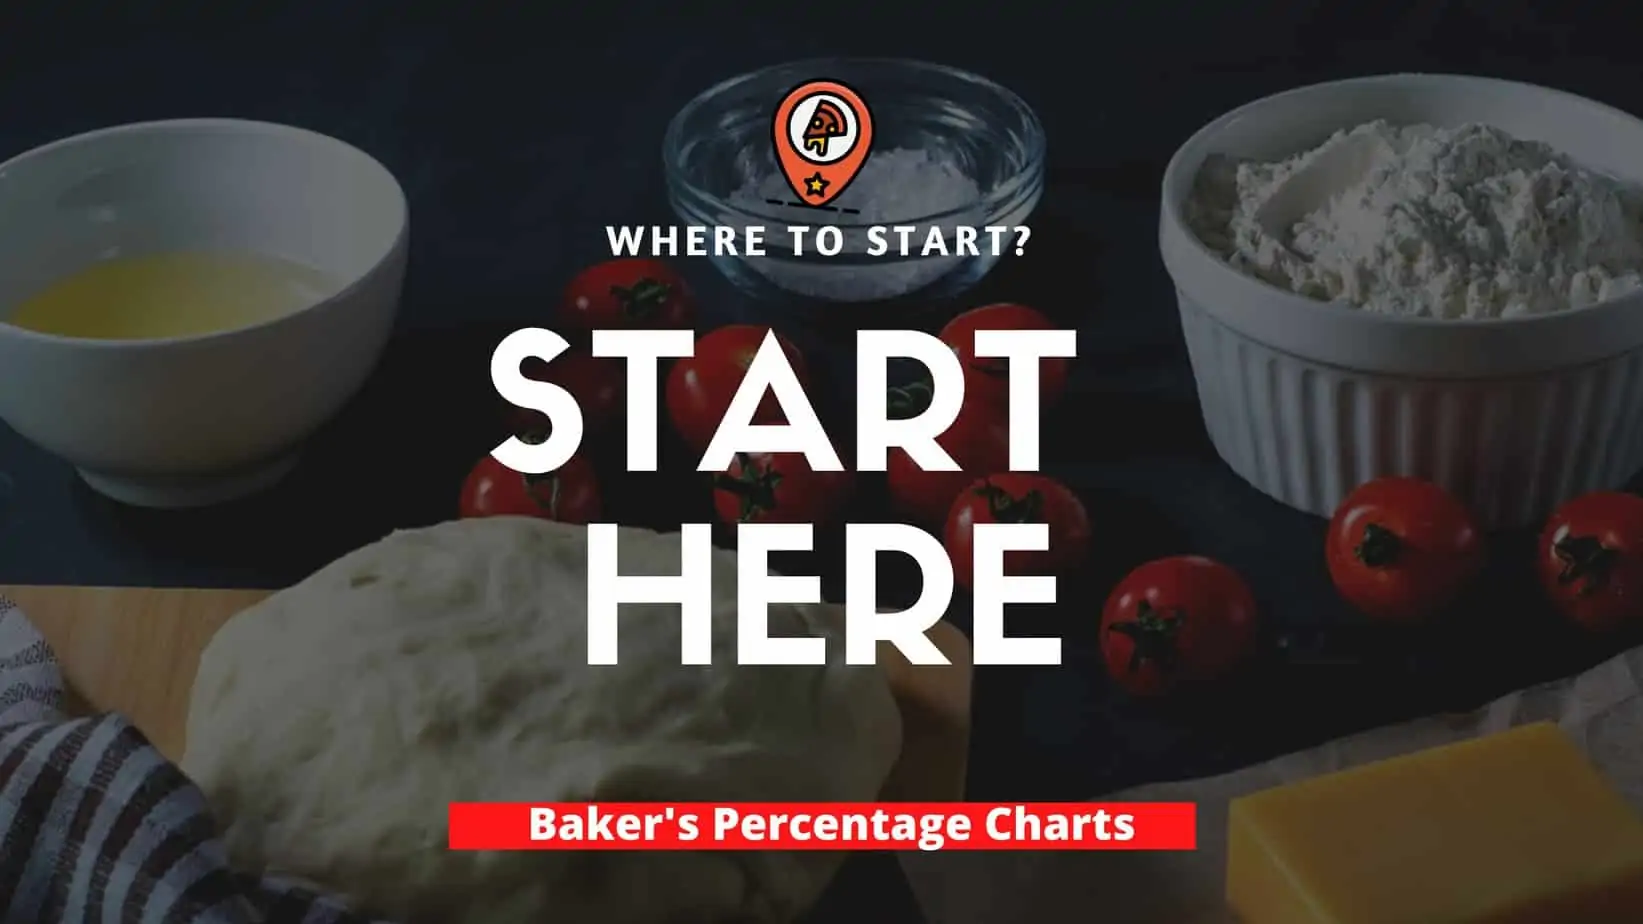 Baker's Percentage Charts for Pizza